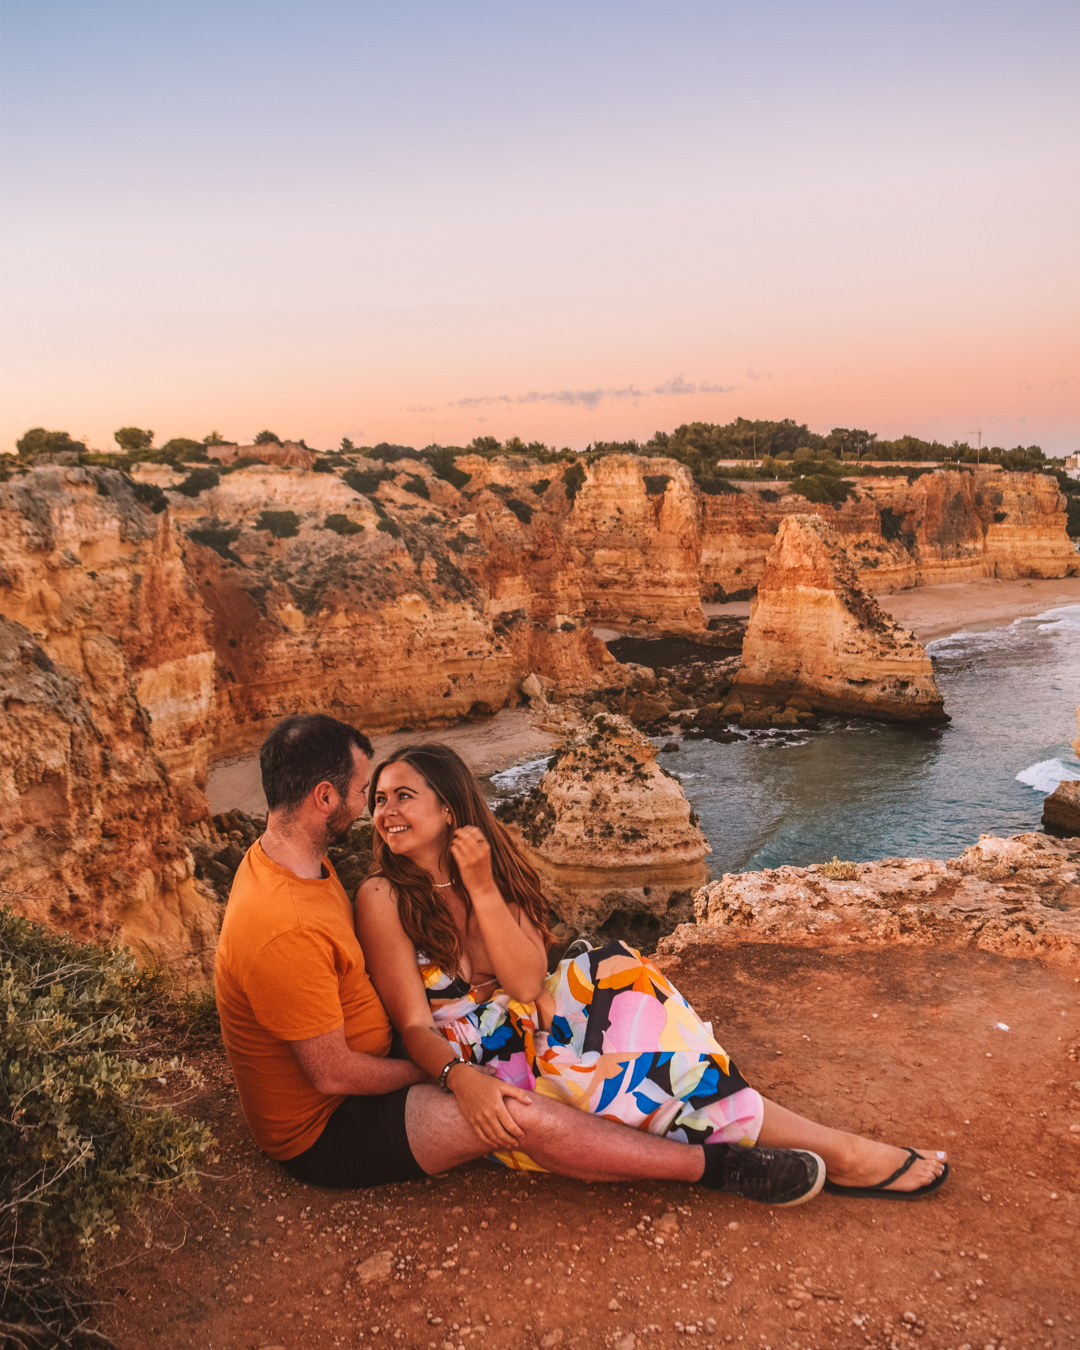 5 Mind-Blowing Beaches Near Lagos, Portugal (Ultimate 2023 Guide)